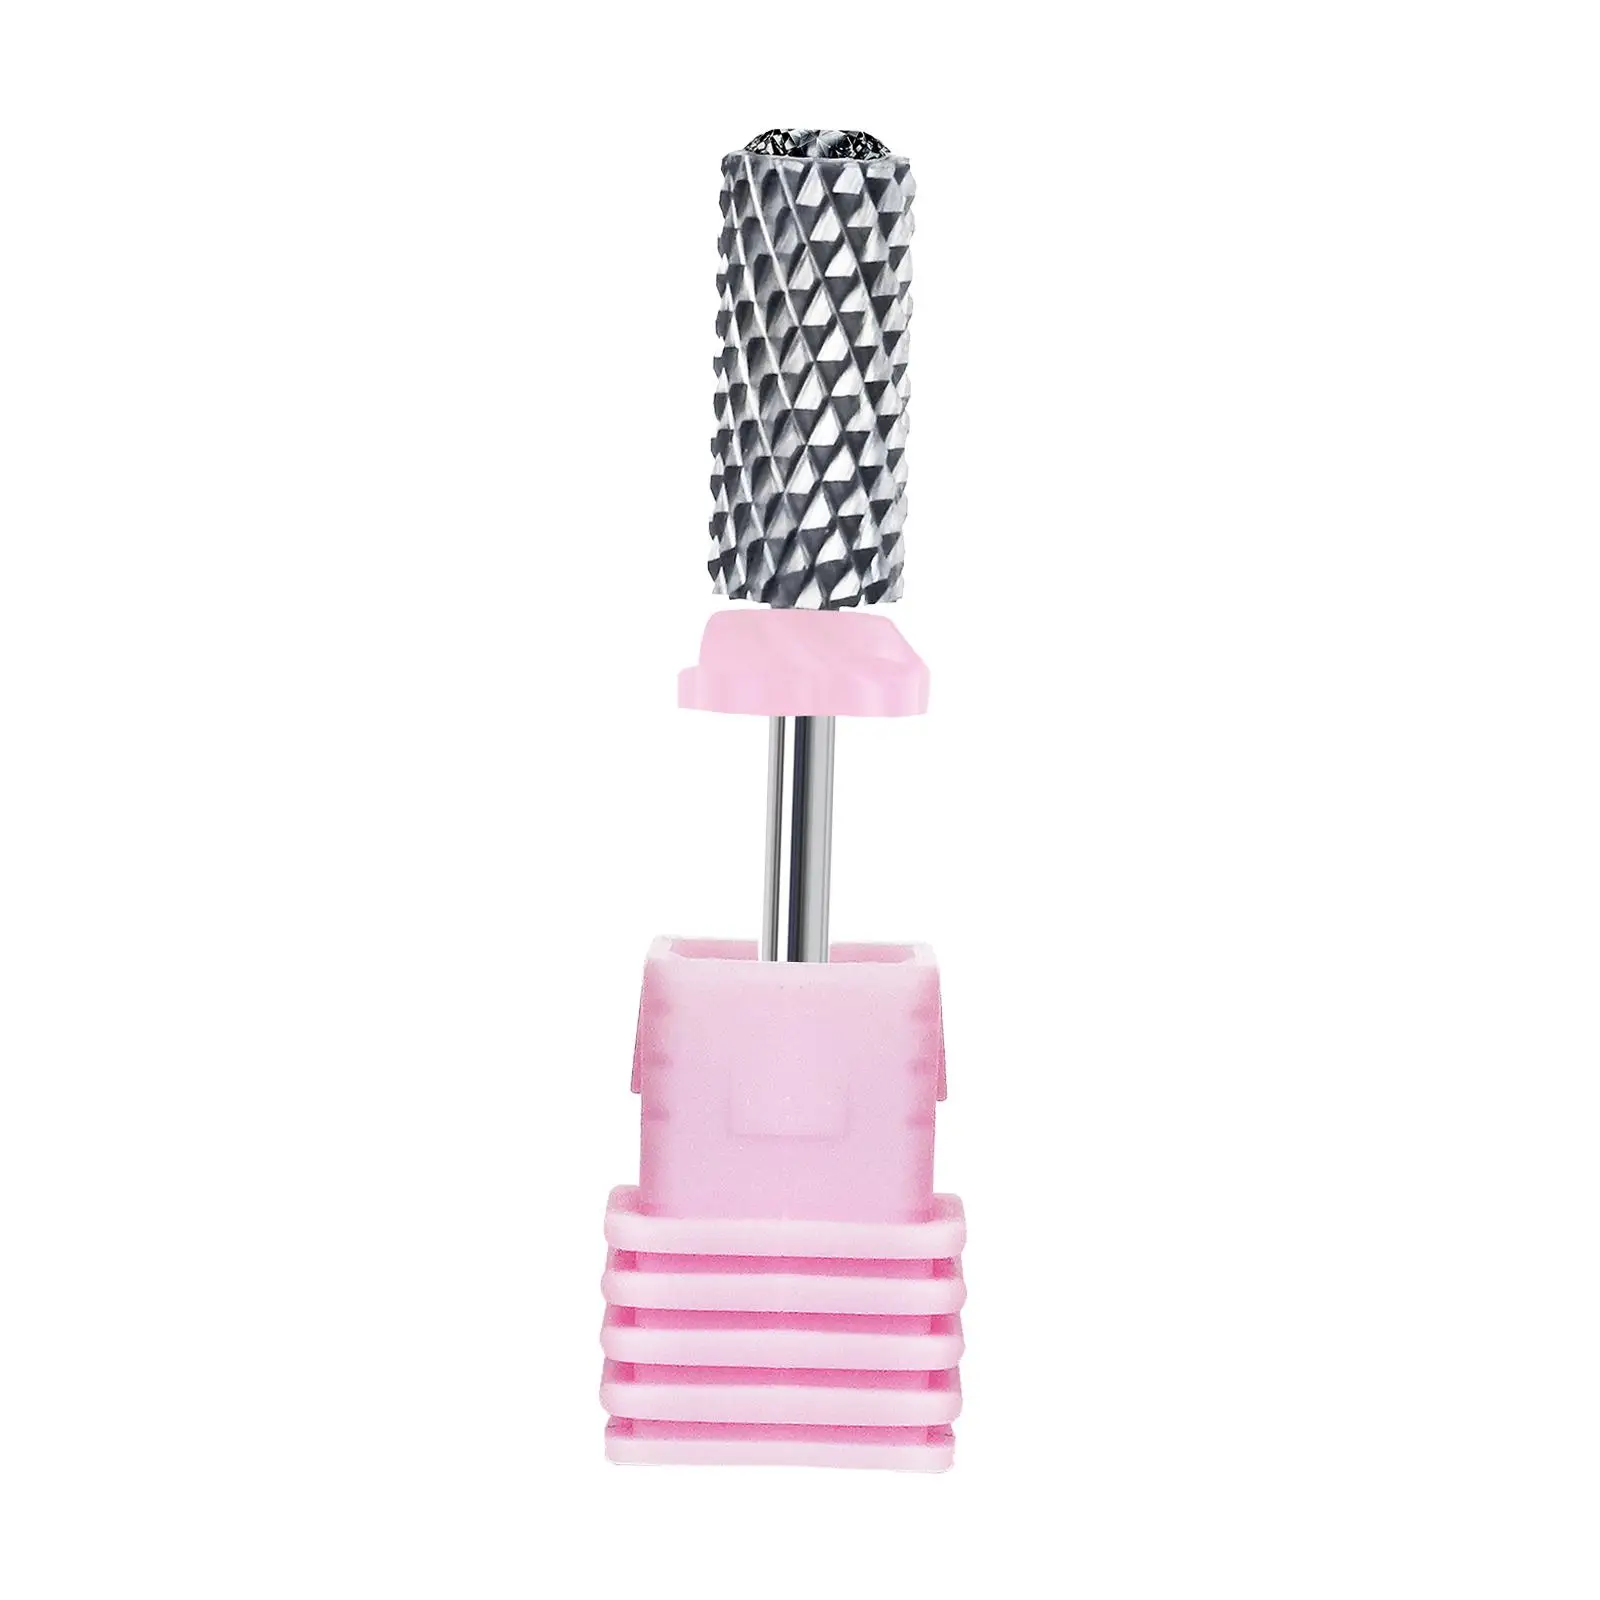 Nail Drill Bit Professional Tungsten Steel Replace Parts Nail Art Tool for Cuticle Polishing Acrylic Gel Nails Salon Home Use